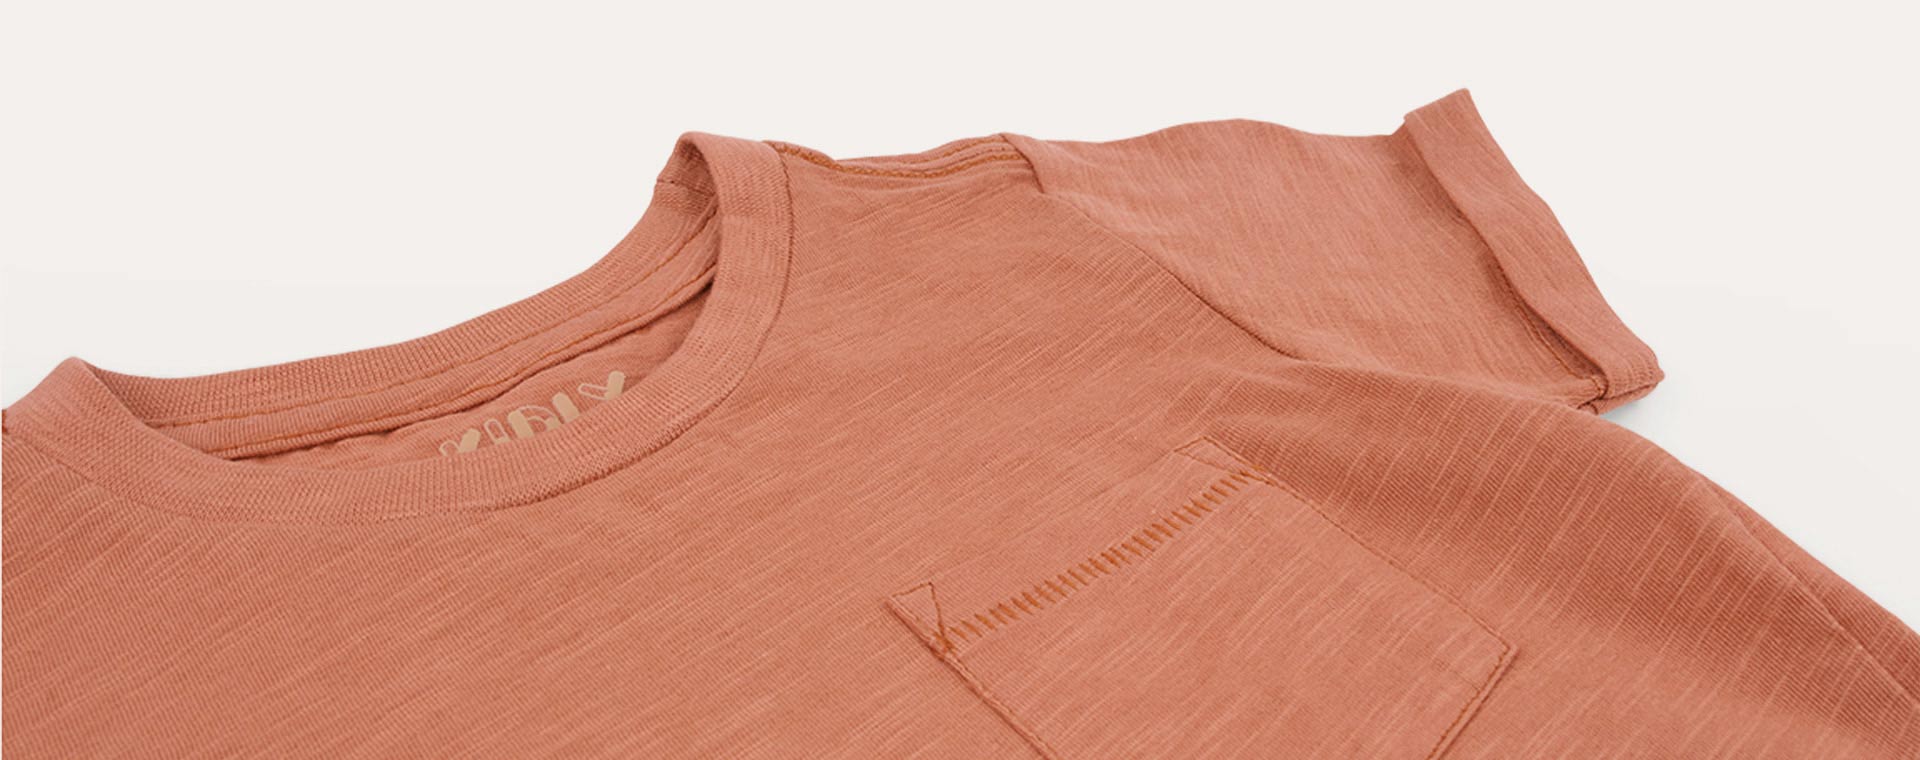 Terracotta KIDLY Label Perfect Tee